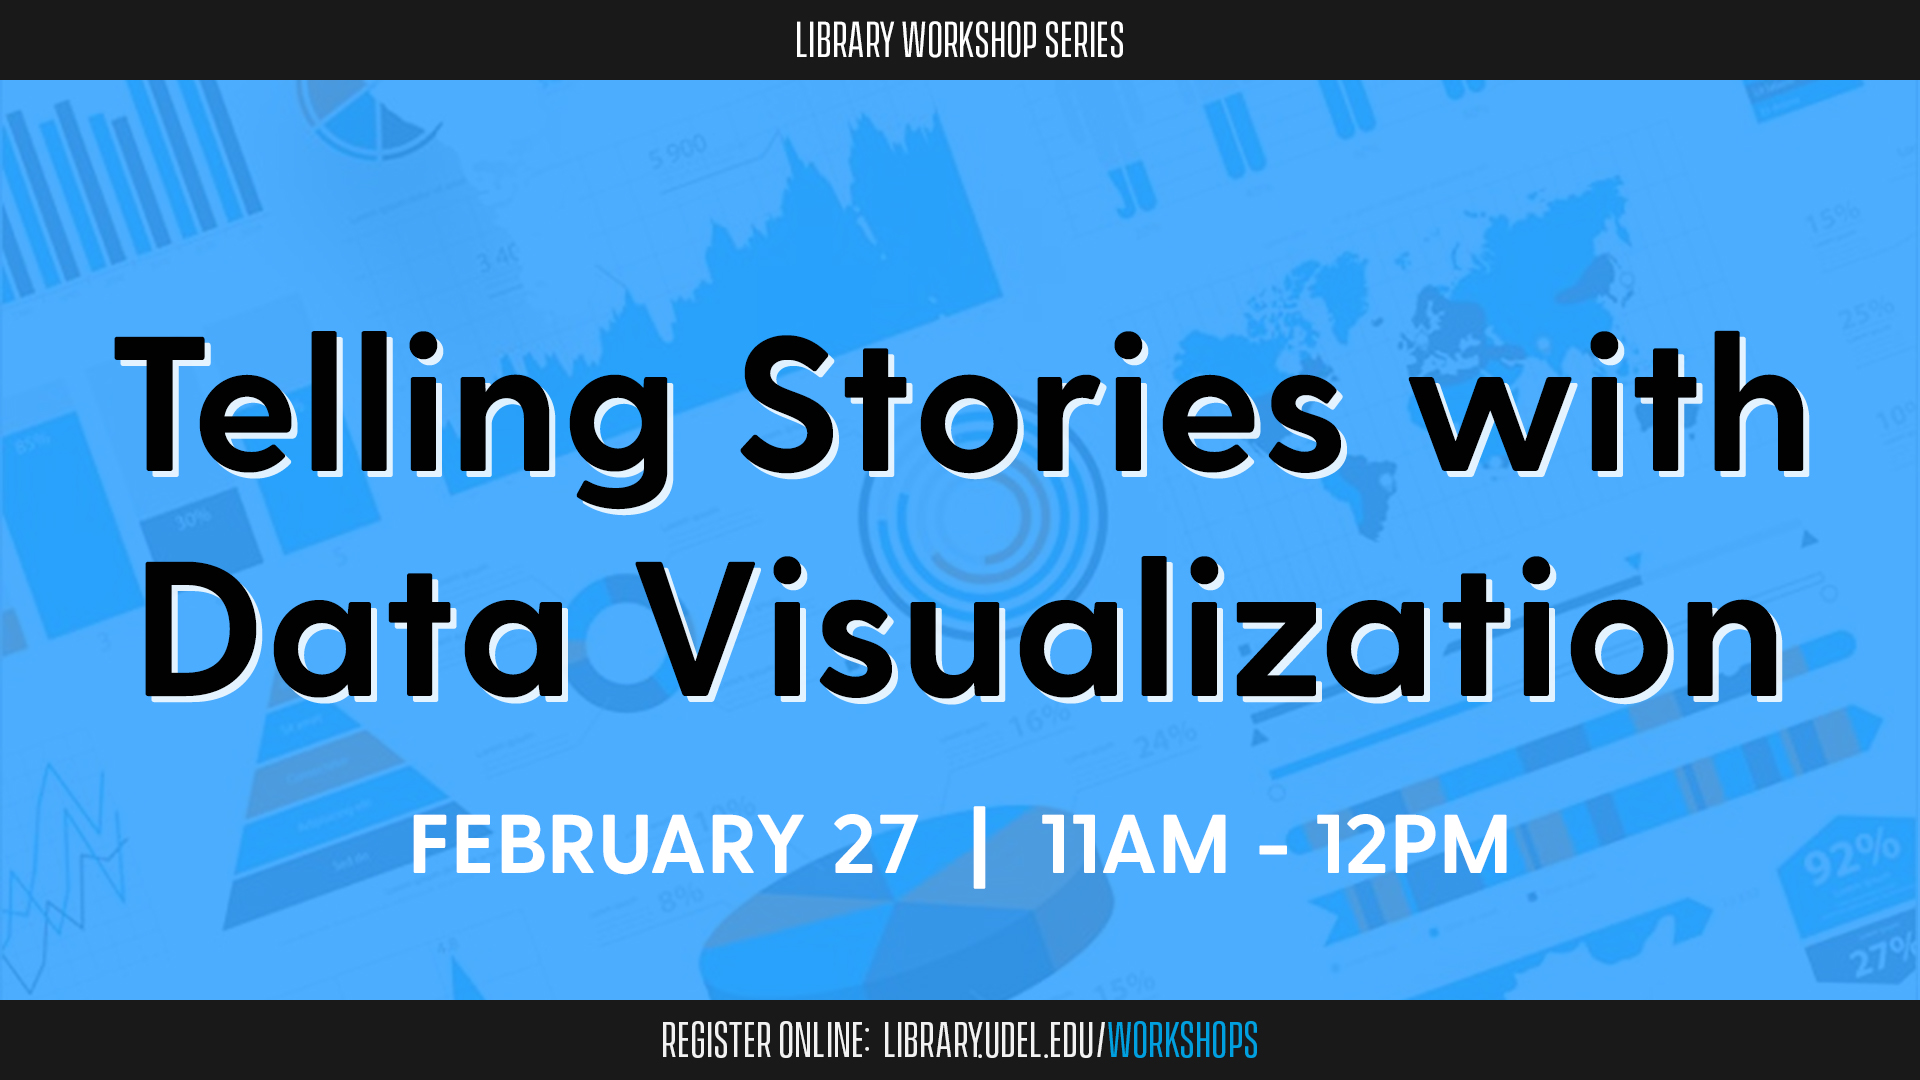 Promotional image for Telling Stories with Data Visualization